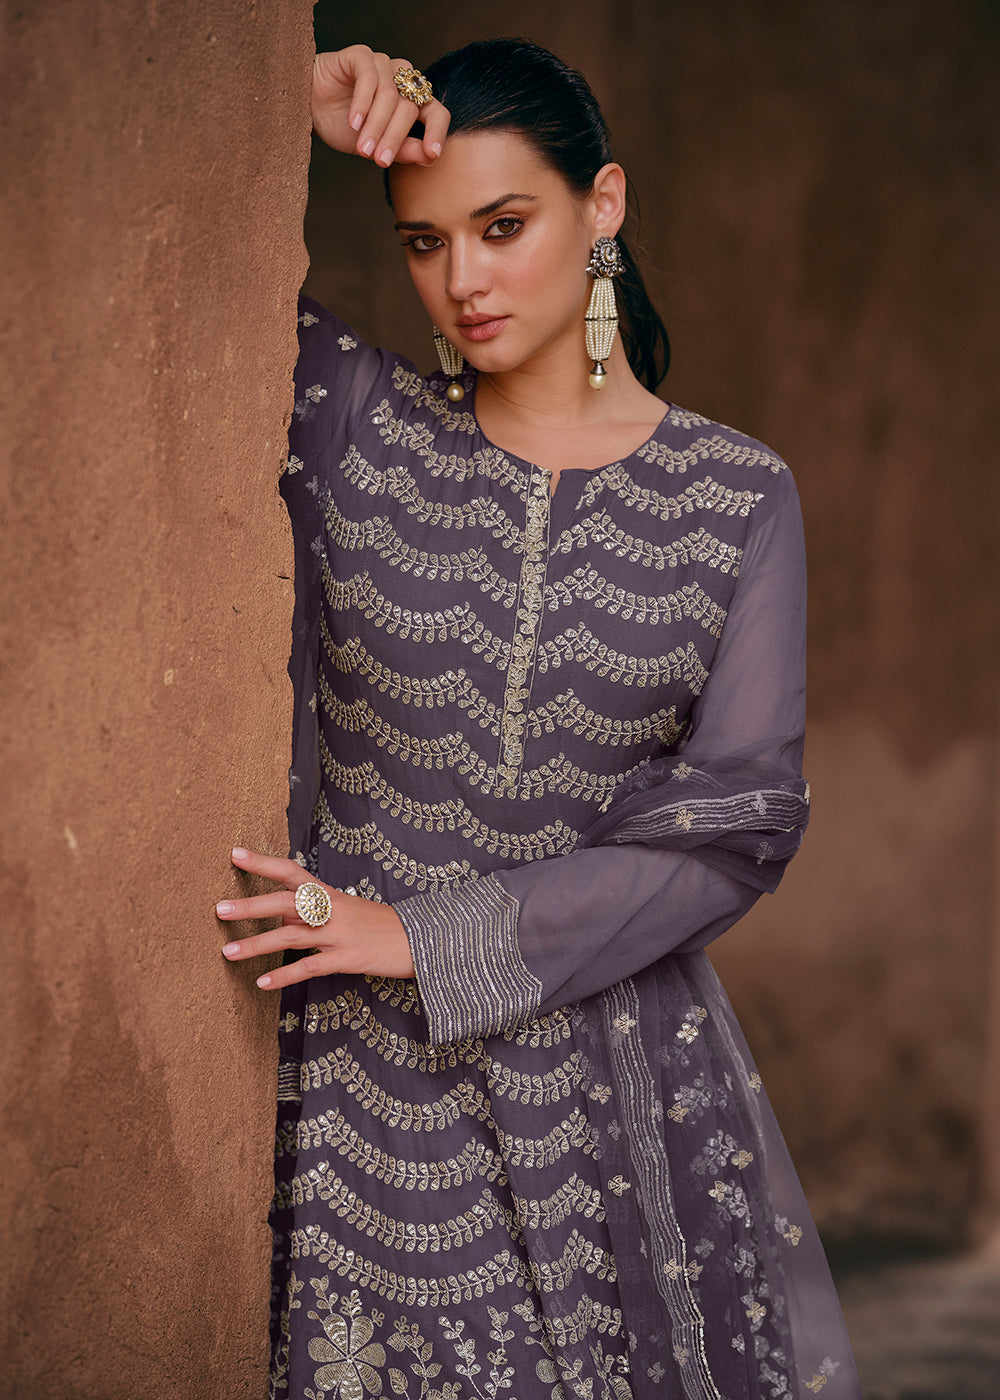 Shop Now Mauve Georgette Designer Style Embroidered Sharara Suit Online at Empress Clothing in USA, UK, Canada, Italy & Worldwide.